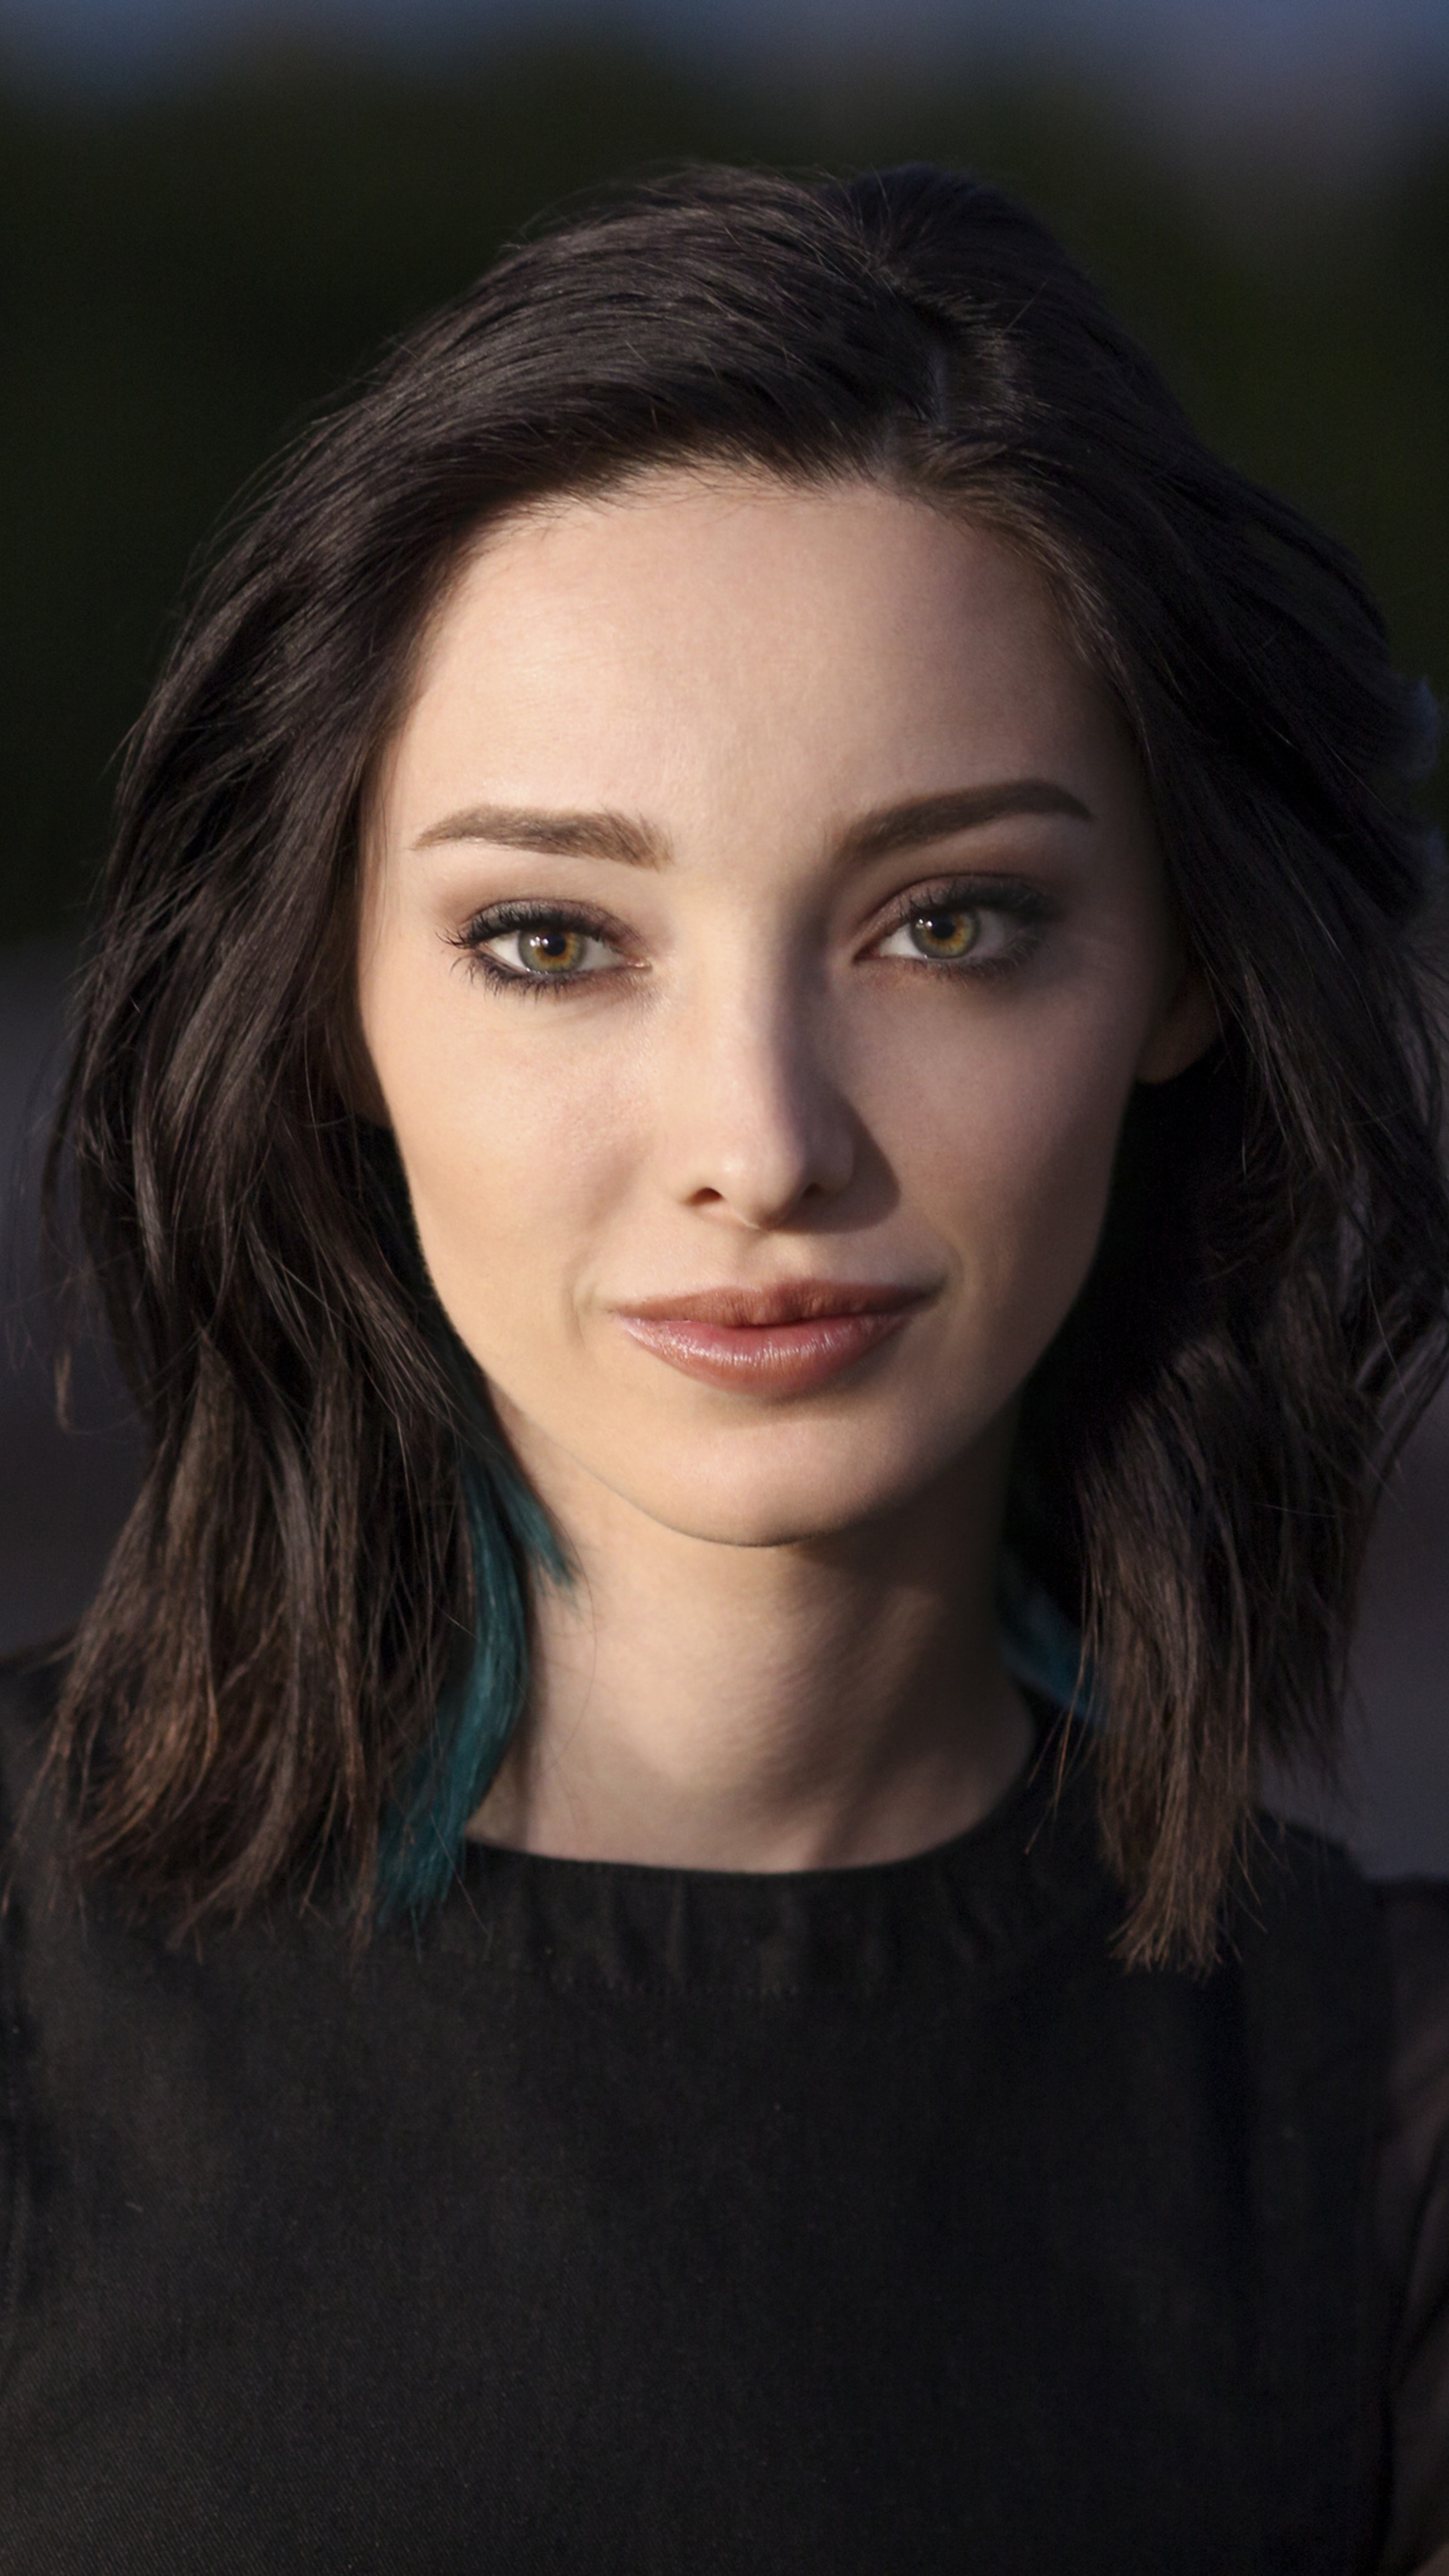 https://hdqwalls.com/download/emma-dumont-the-gifted-13-2160x3840.jpg